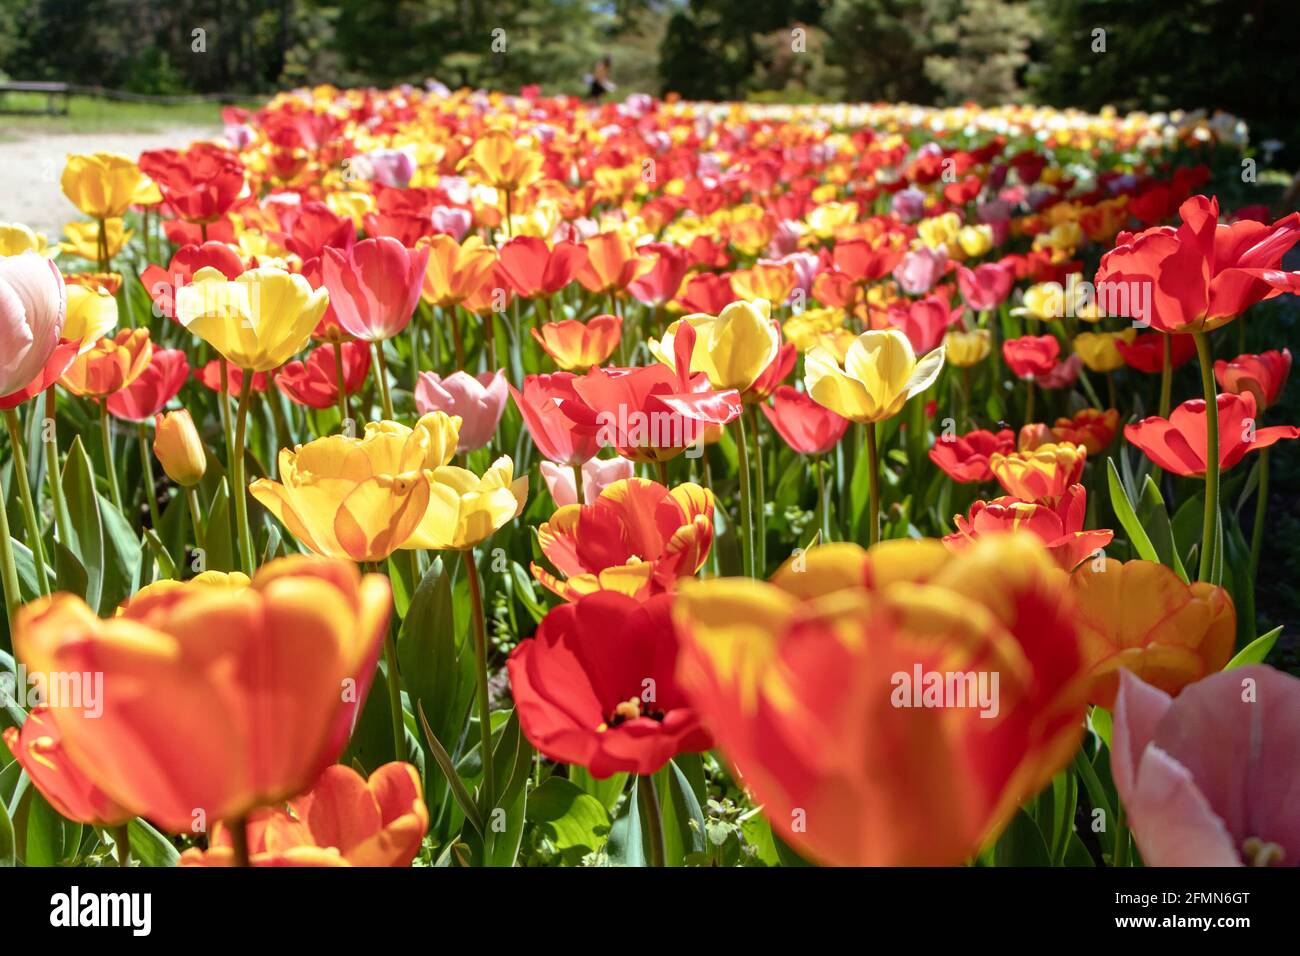 Tulip field with bright flowers assorted colors Stock Photo